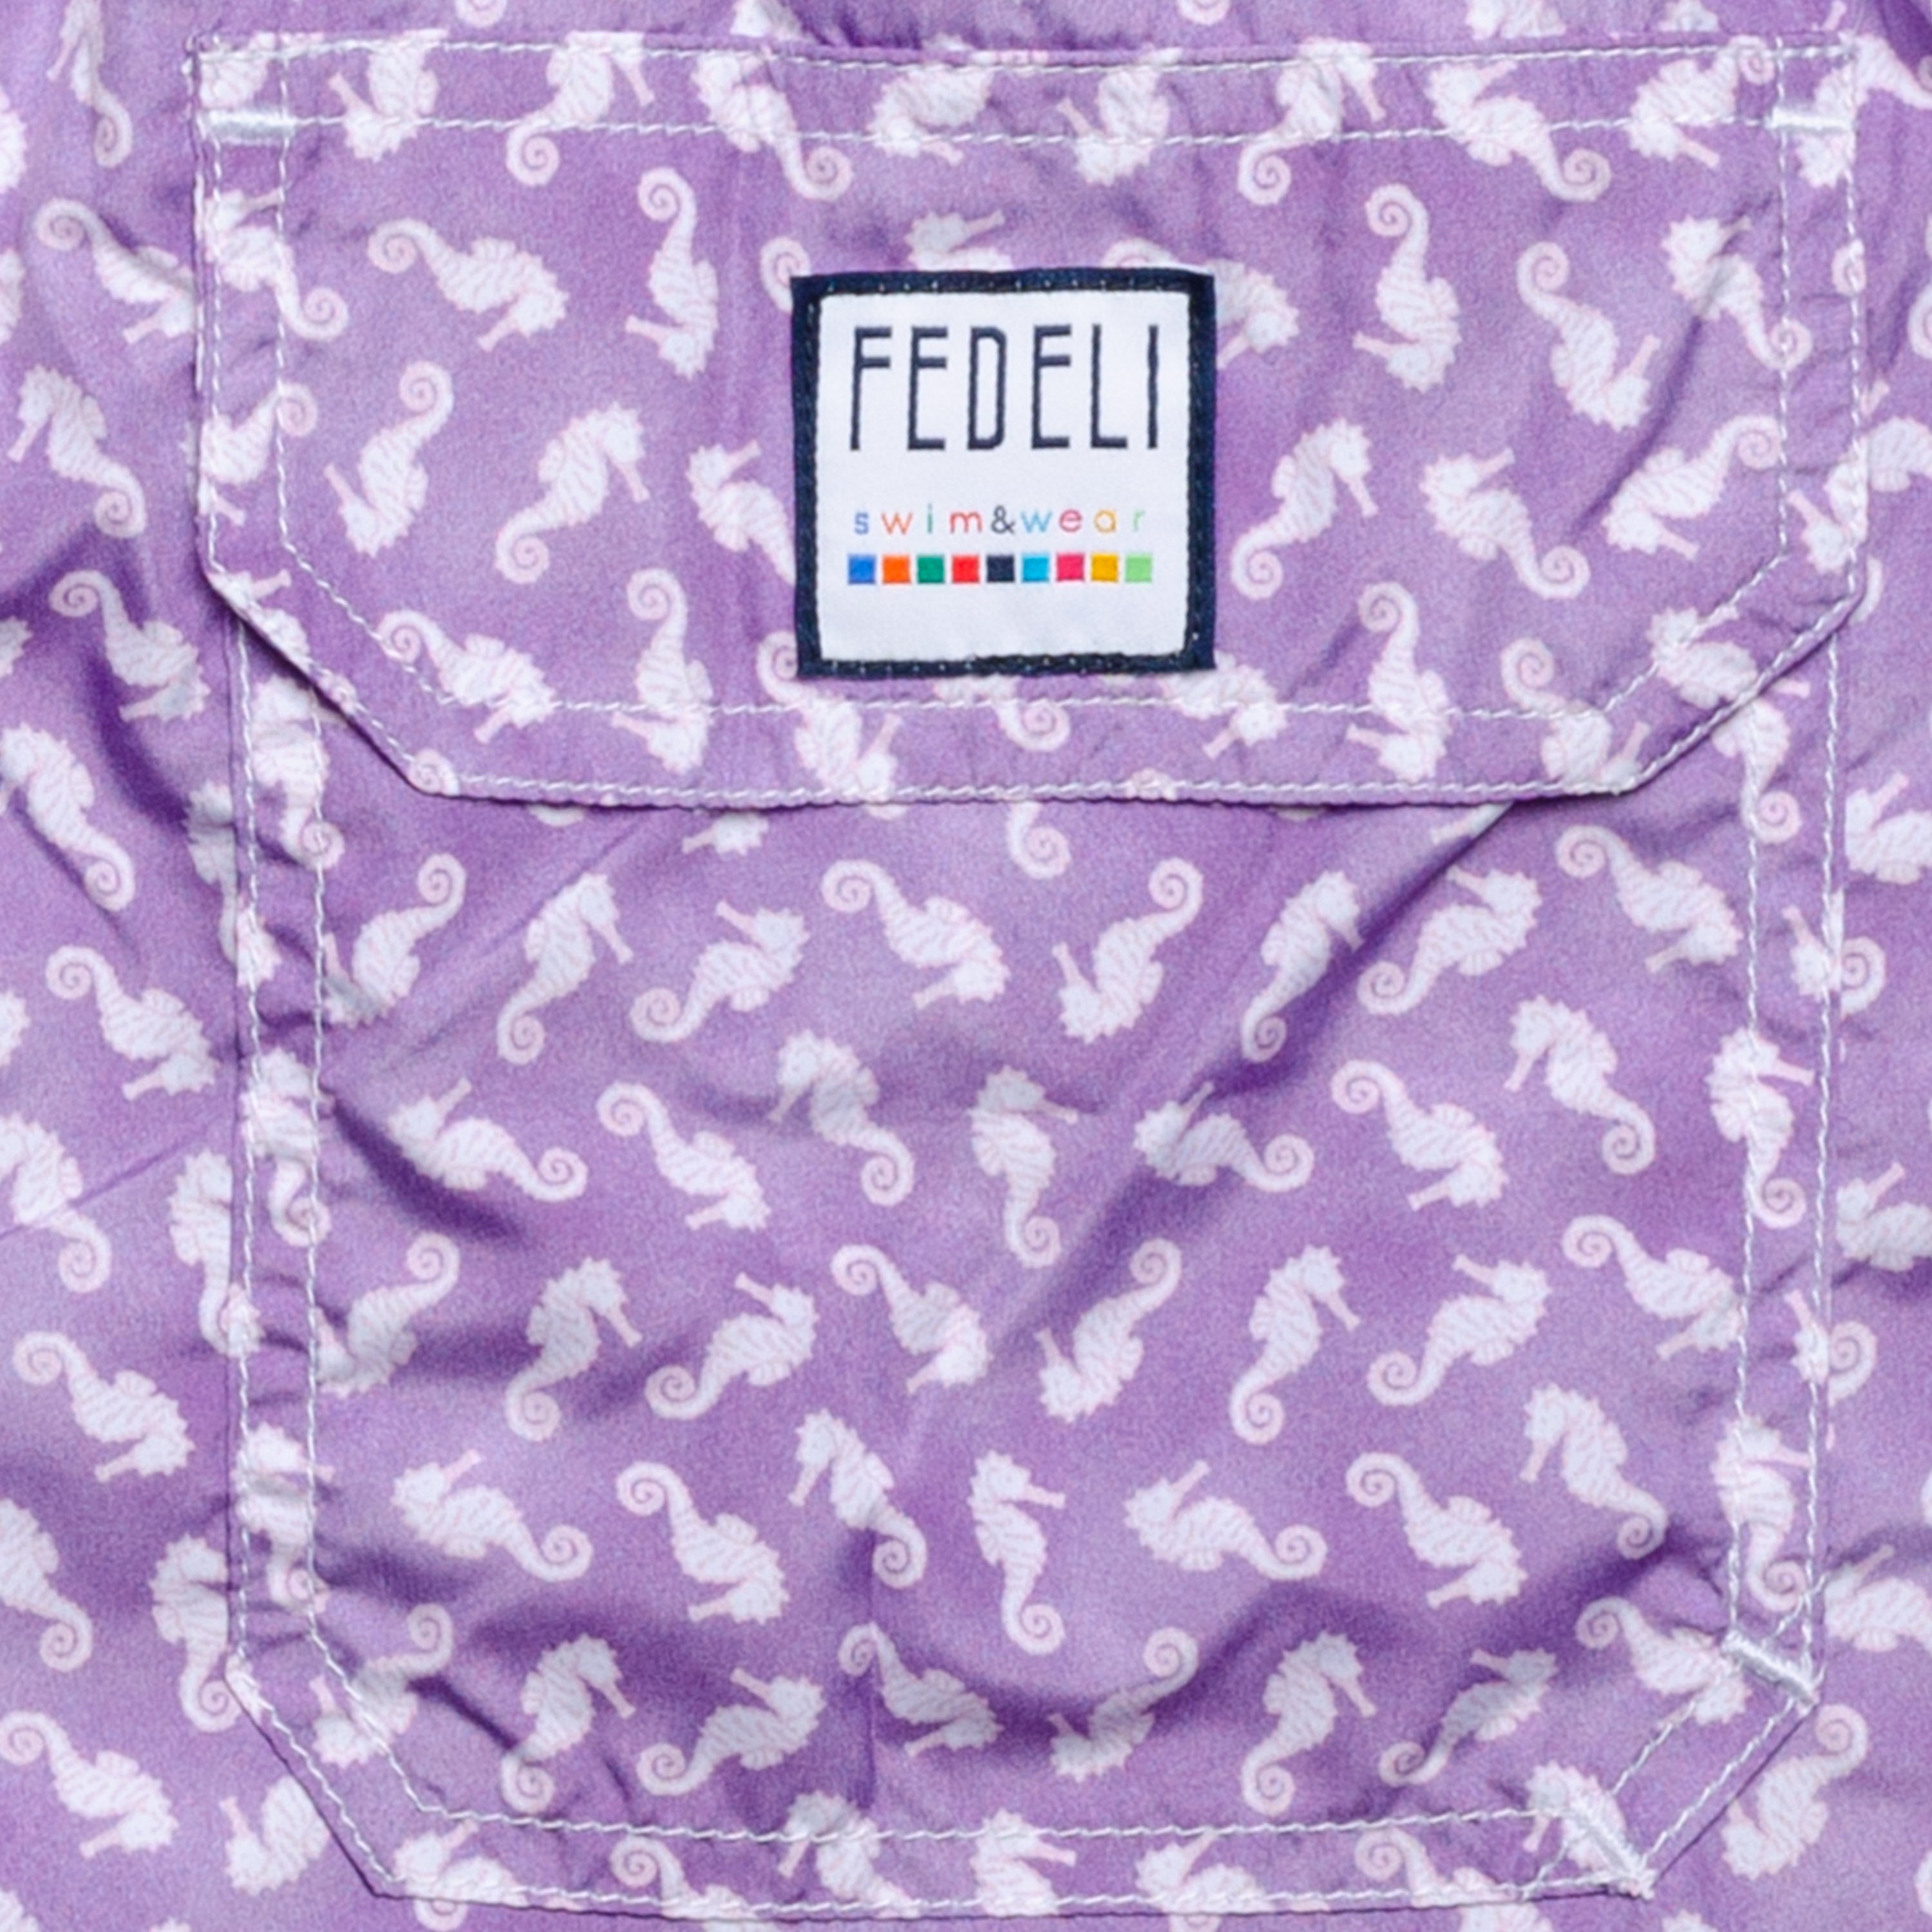 FEDELI Made in Italy Purple Seahorses Madeira Airstop Swim Shorts Trunks NEW FEDELI